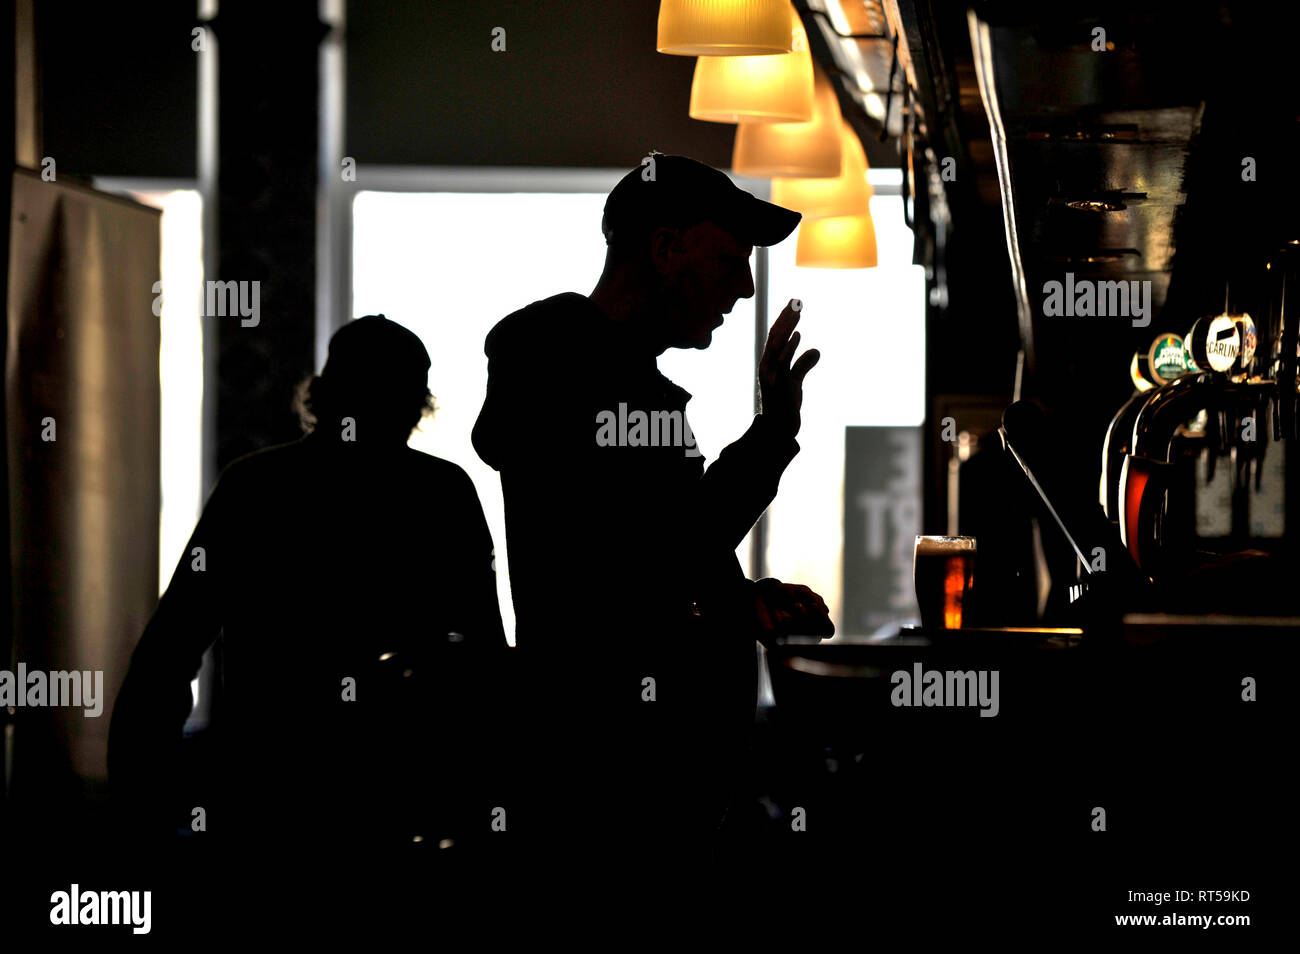 Silhouette of two men wearing baseball caps at bar in pub Stock Photo